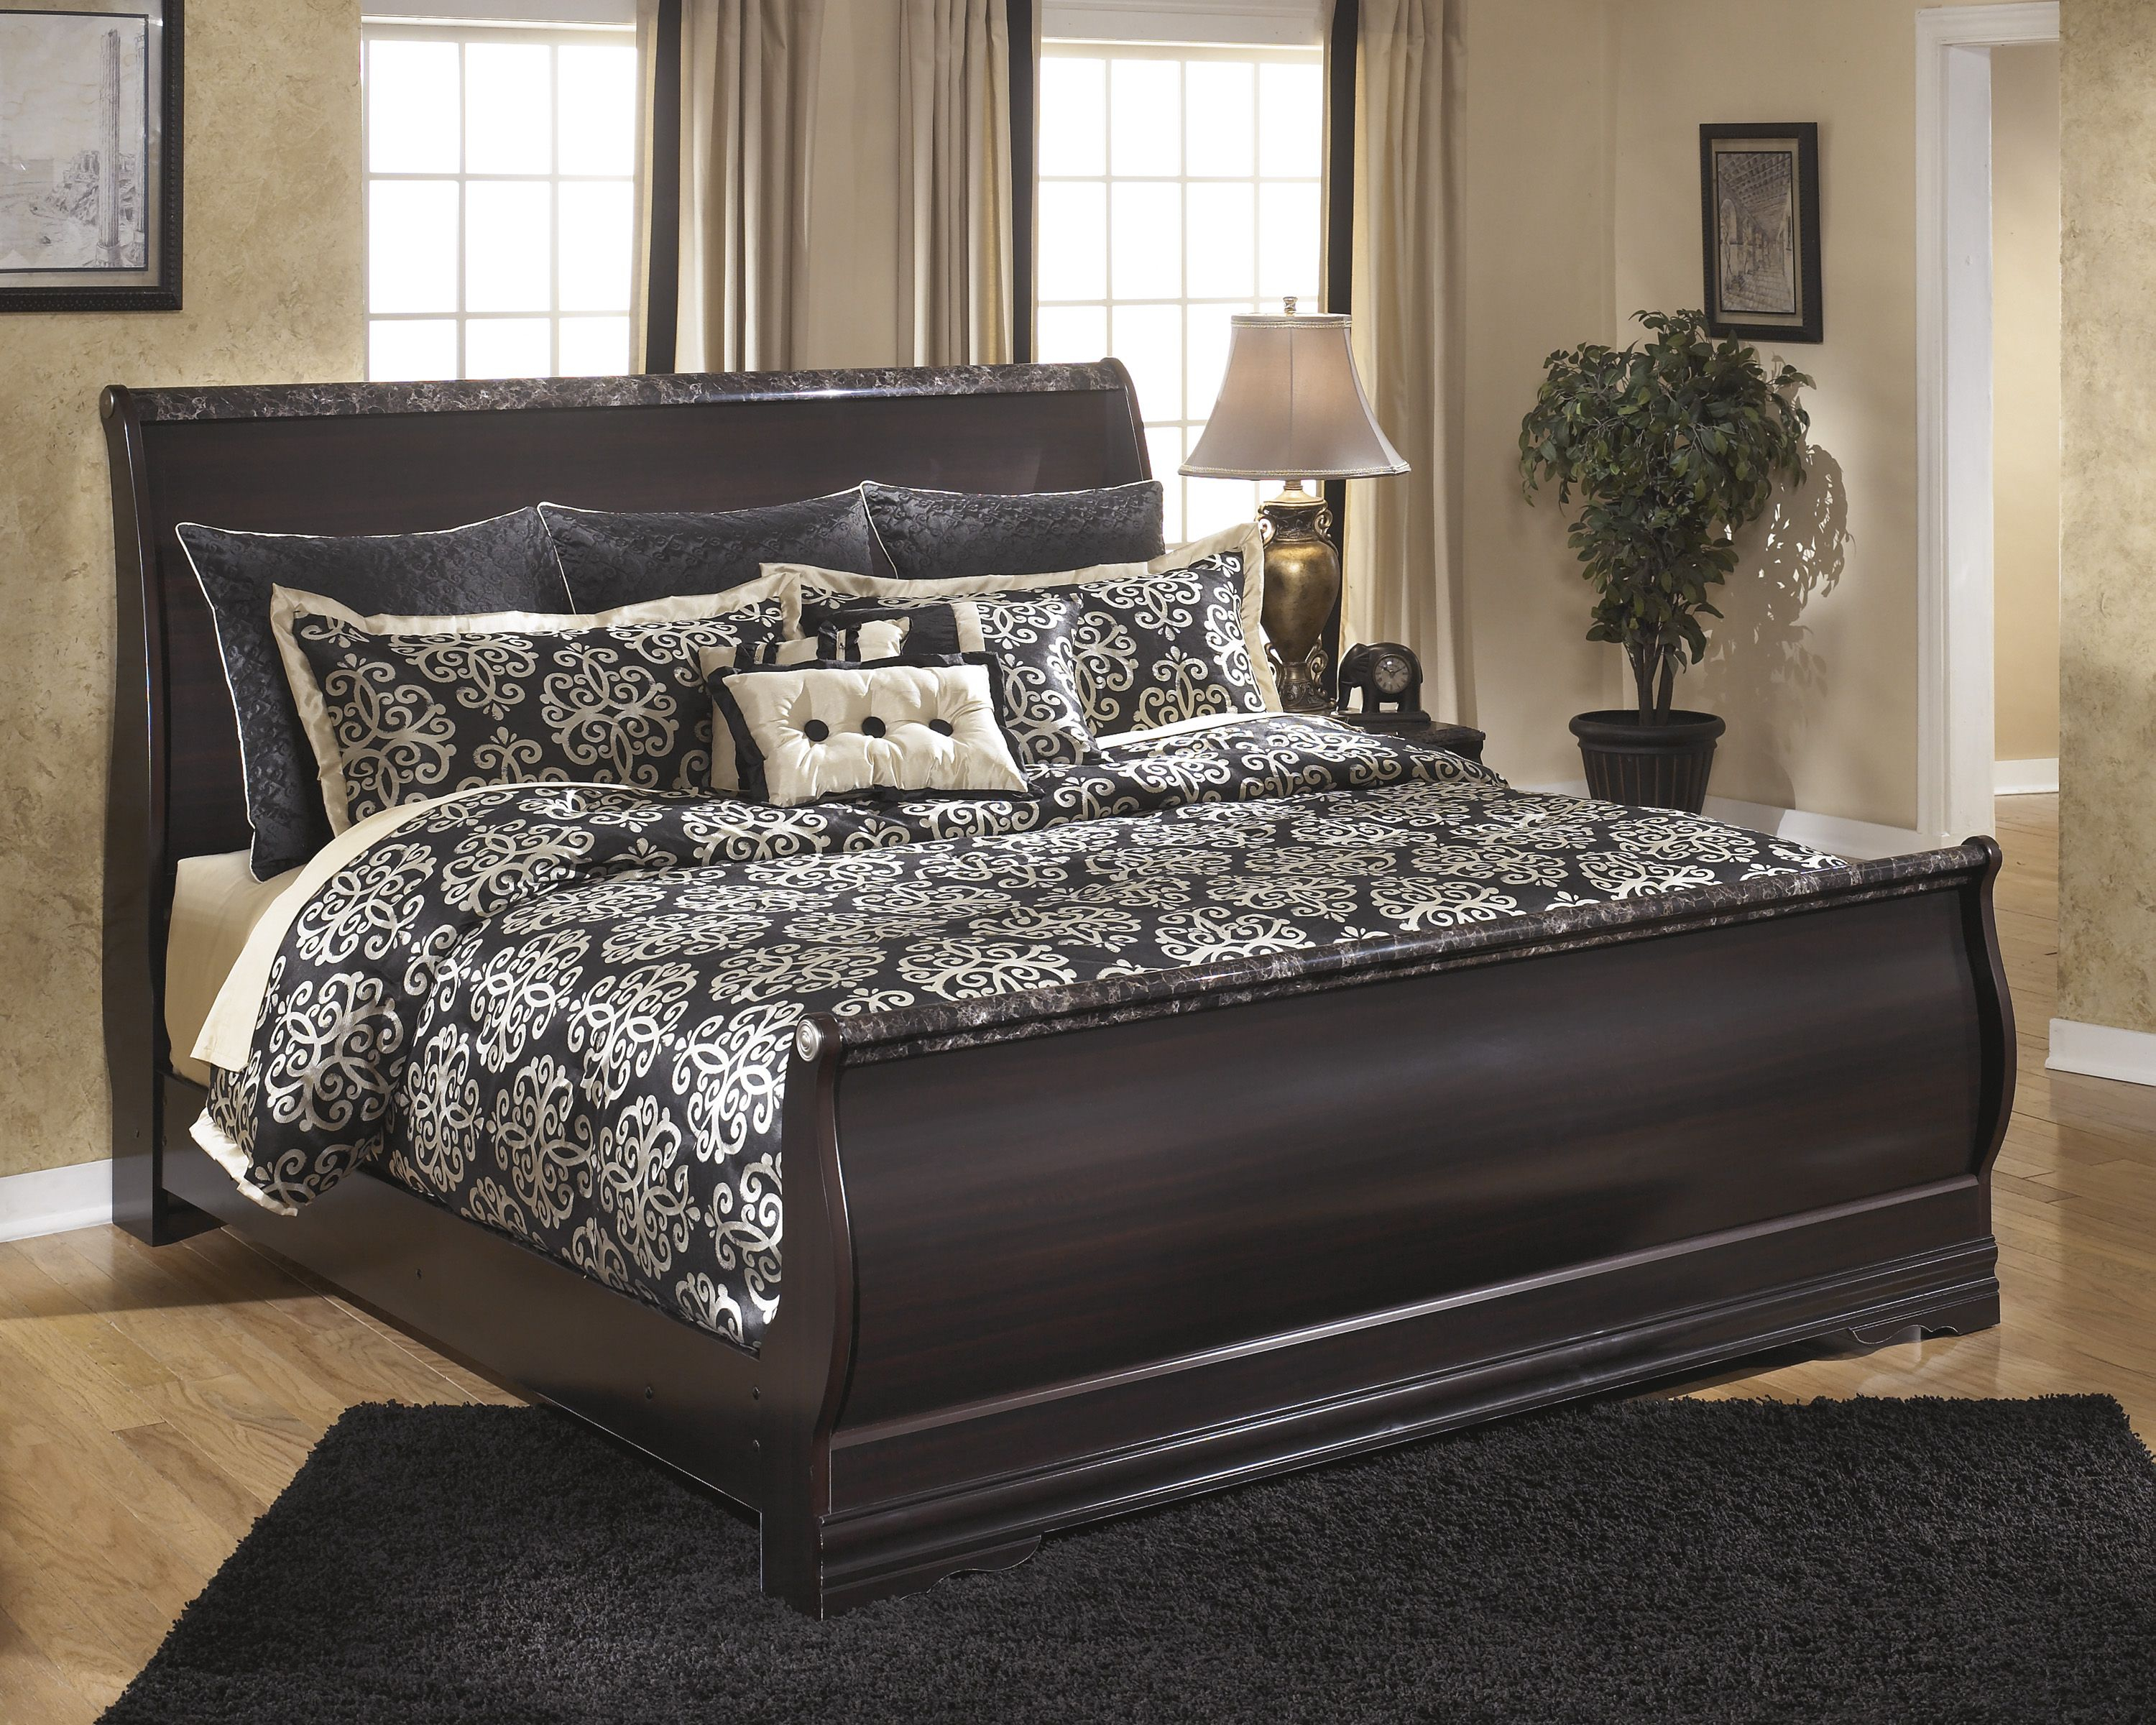 Alternate Style Sleigh Bed Is Also Available The Esmeralda pertaining to proportions 3000 X 2400